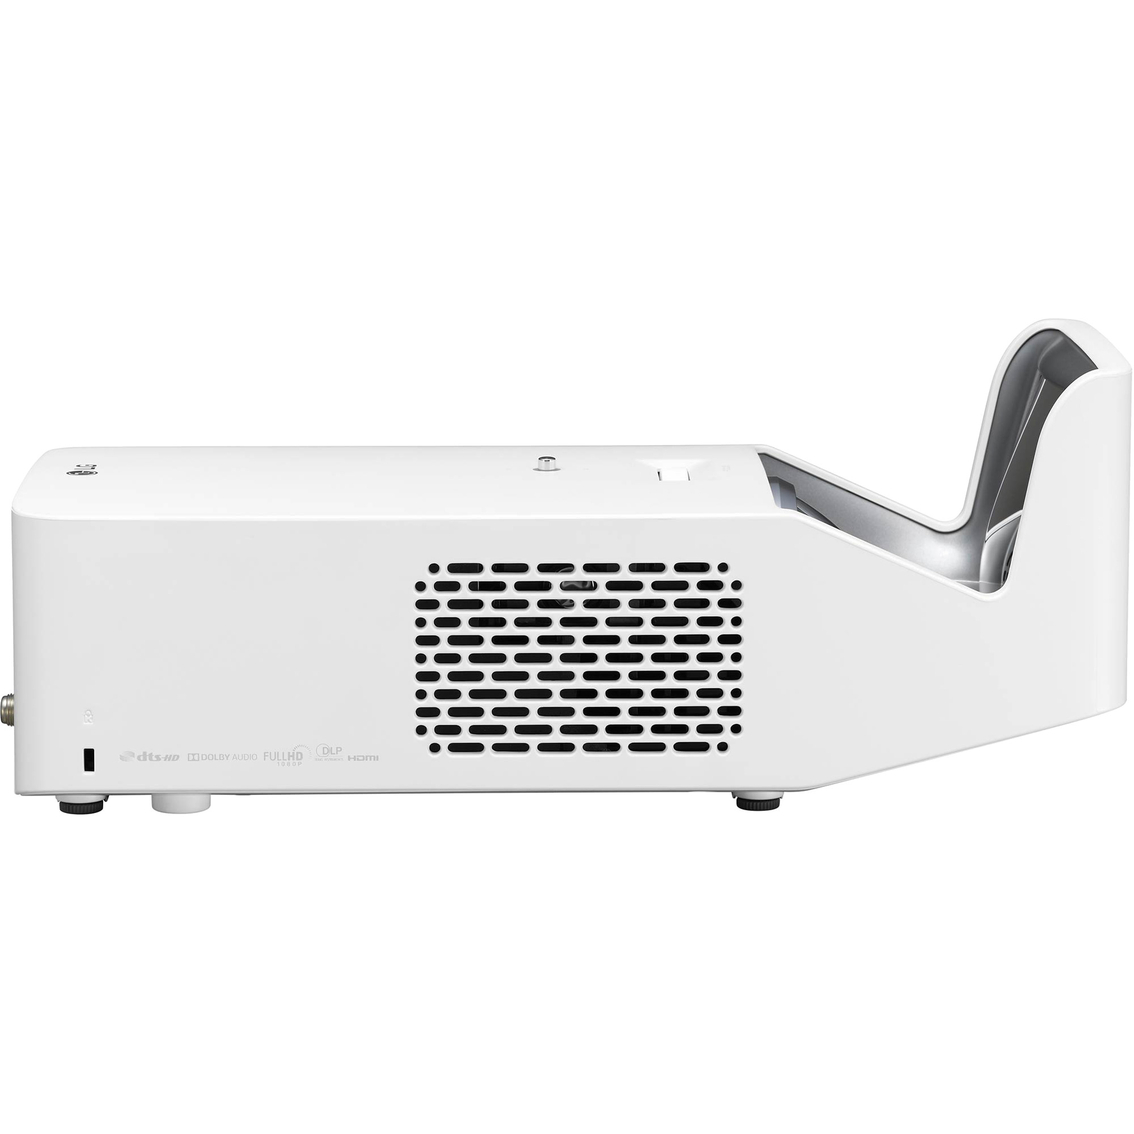 LG HF65LA CineBeam Ultra Short Throw LED Smart Home Theater Projector - Image 3 of 10